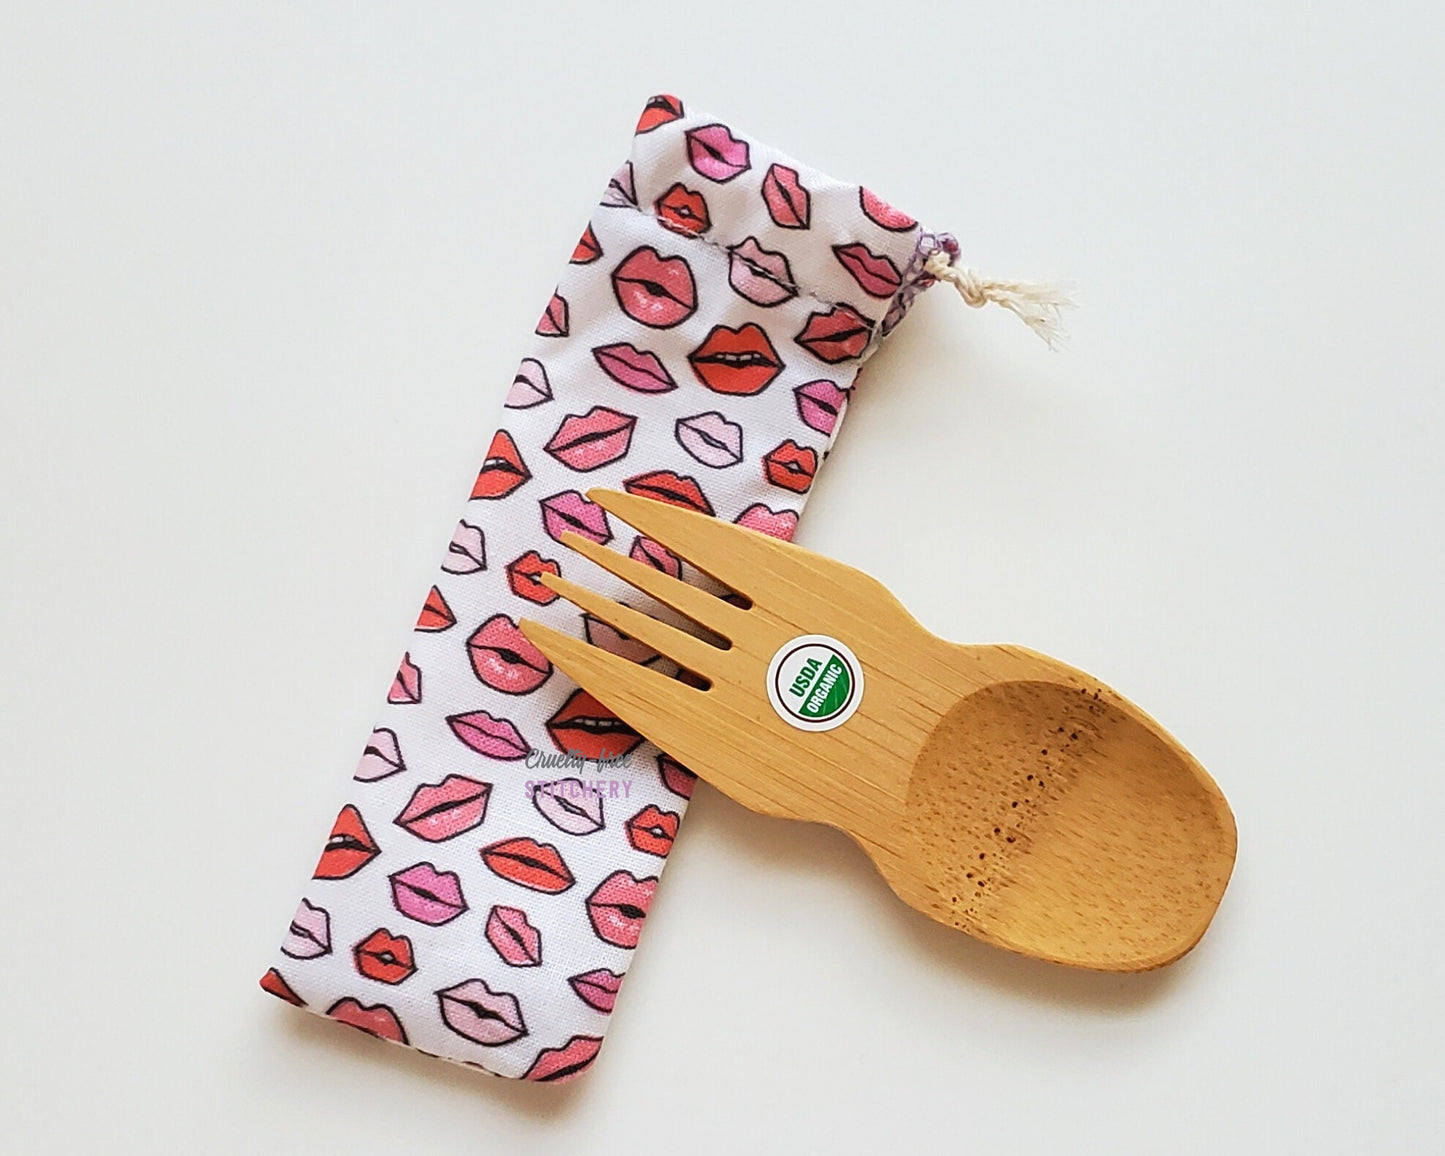 White with tiny pink lips print reusable spork pouch. The pouch is sitting diagonally with the spork partially on top pointing the other way. The fork end of the spork is pointing to the left.